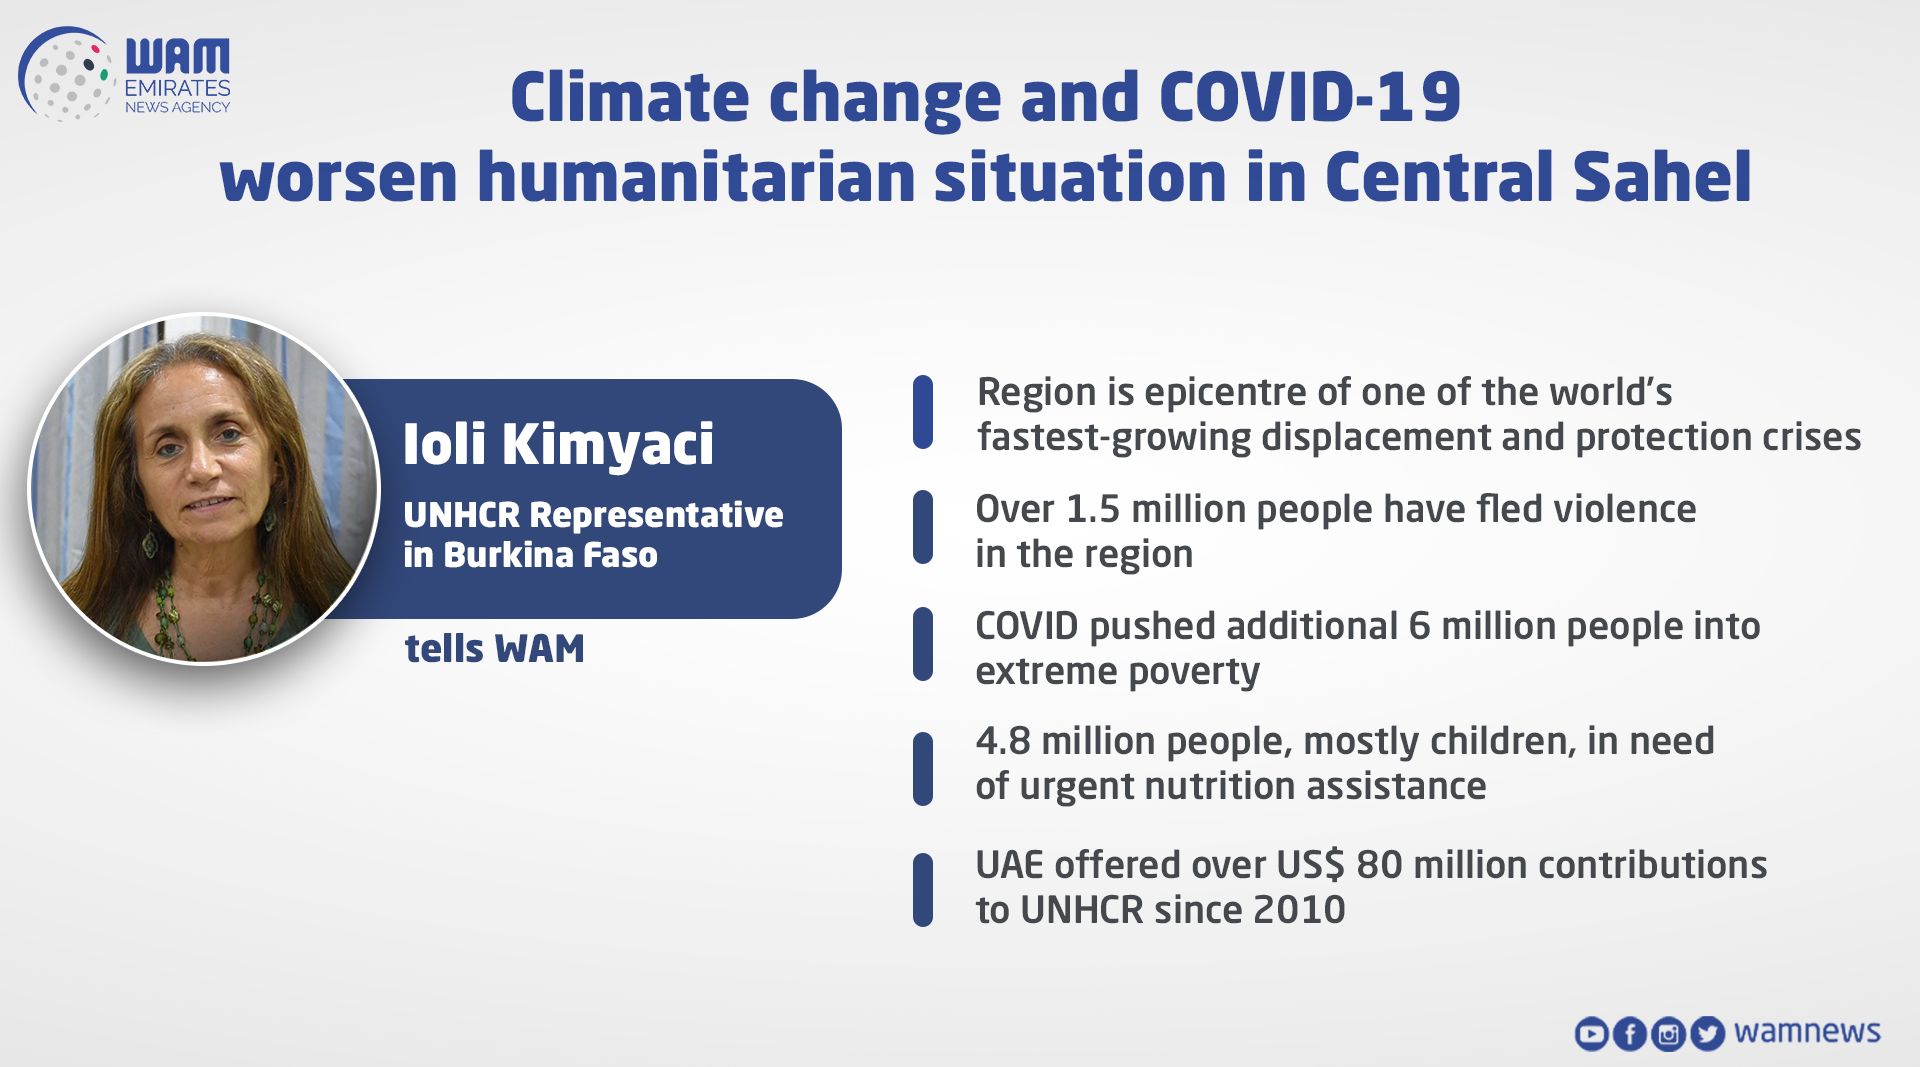 1.5 million people in Central Sahel displaced due to climatic events and Covid-19, UNHCR appreciates UAE’s support